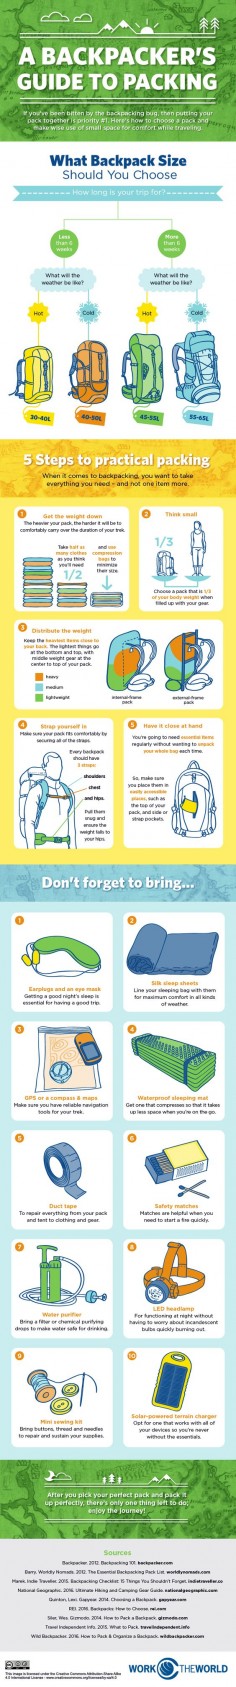 A Backpacker's Guide to Packing